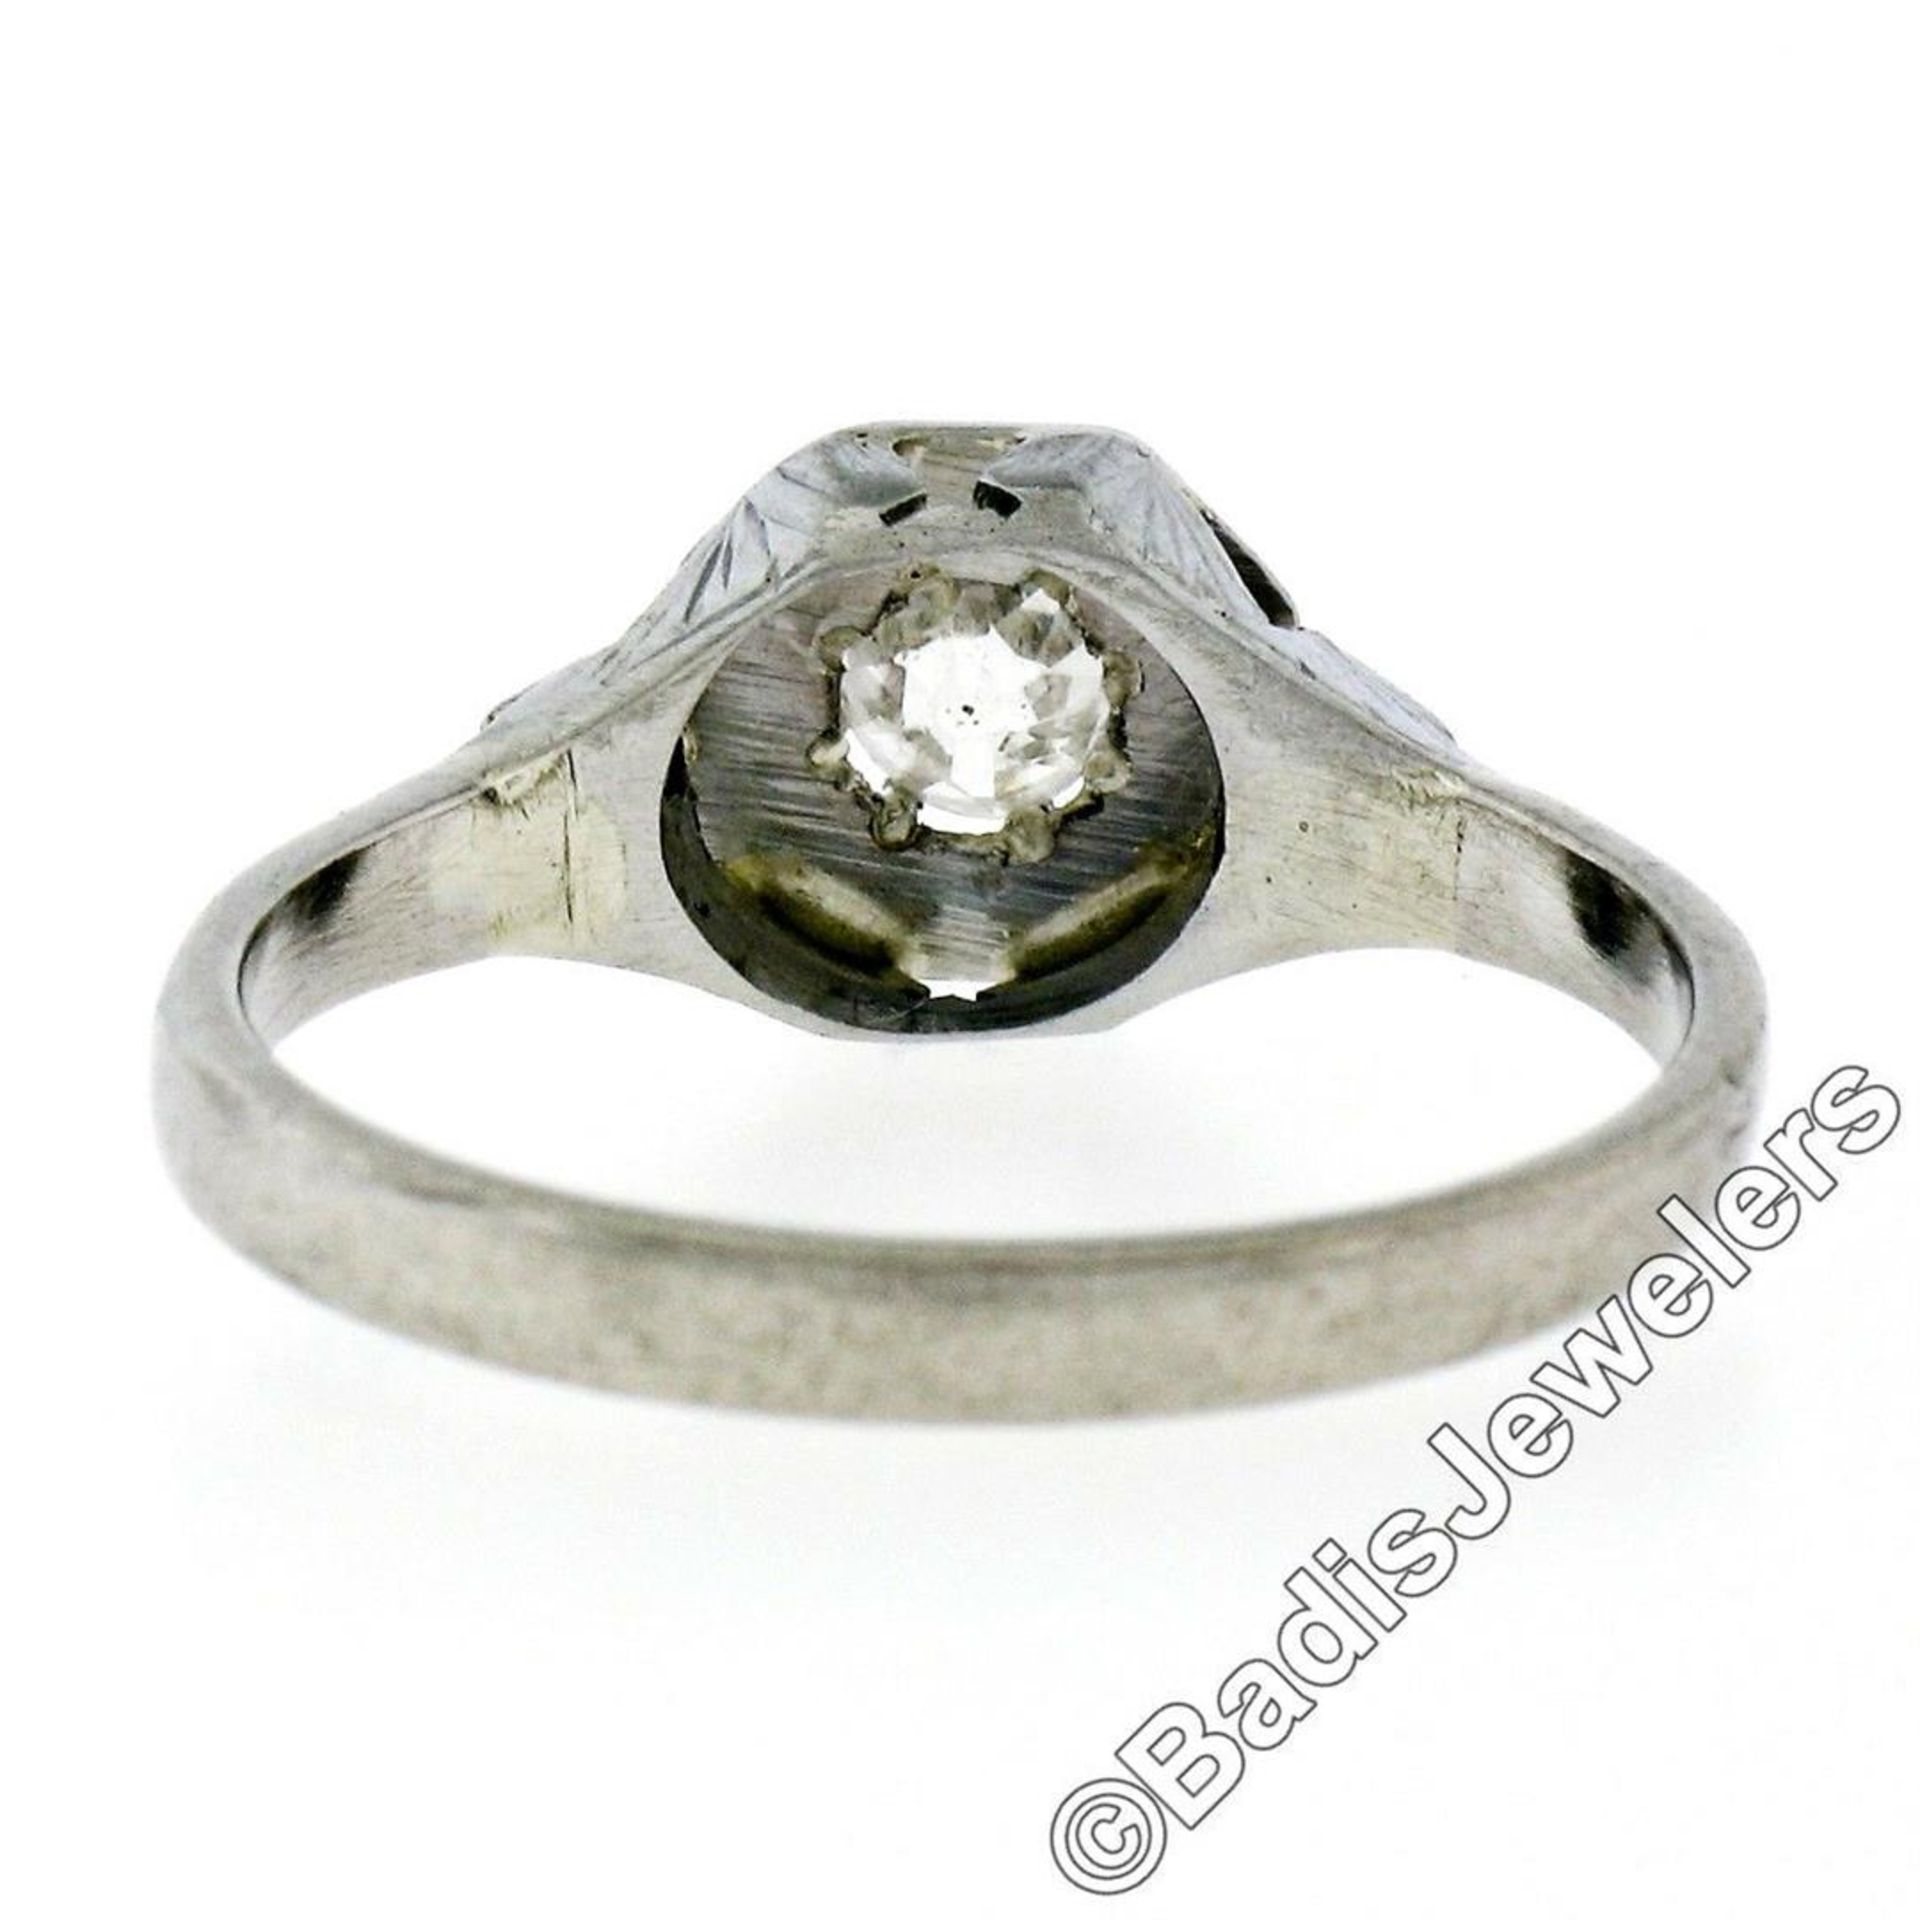 Art Deco 14kt White Gold 0.28 ctw Diamond Solitaire Engagement Ring - Image 7 of 7